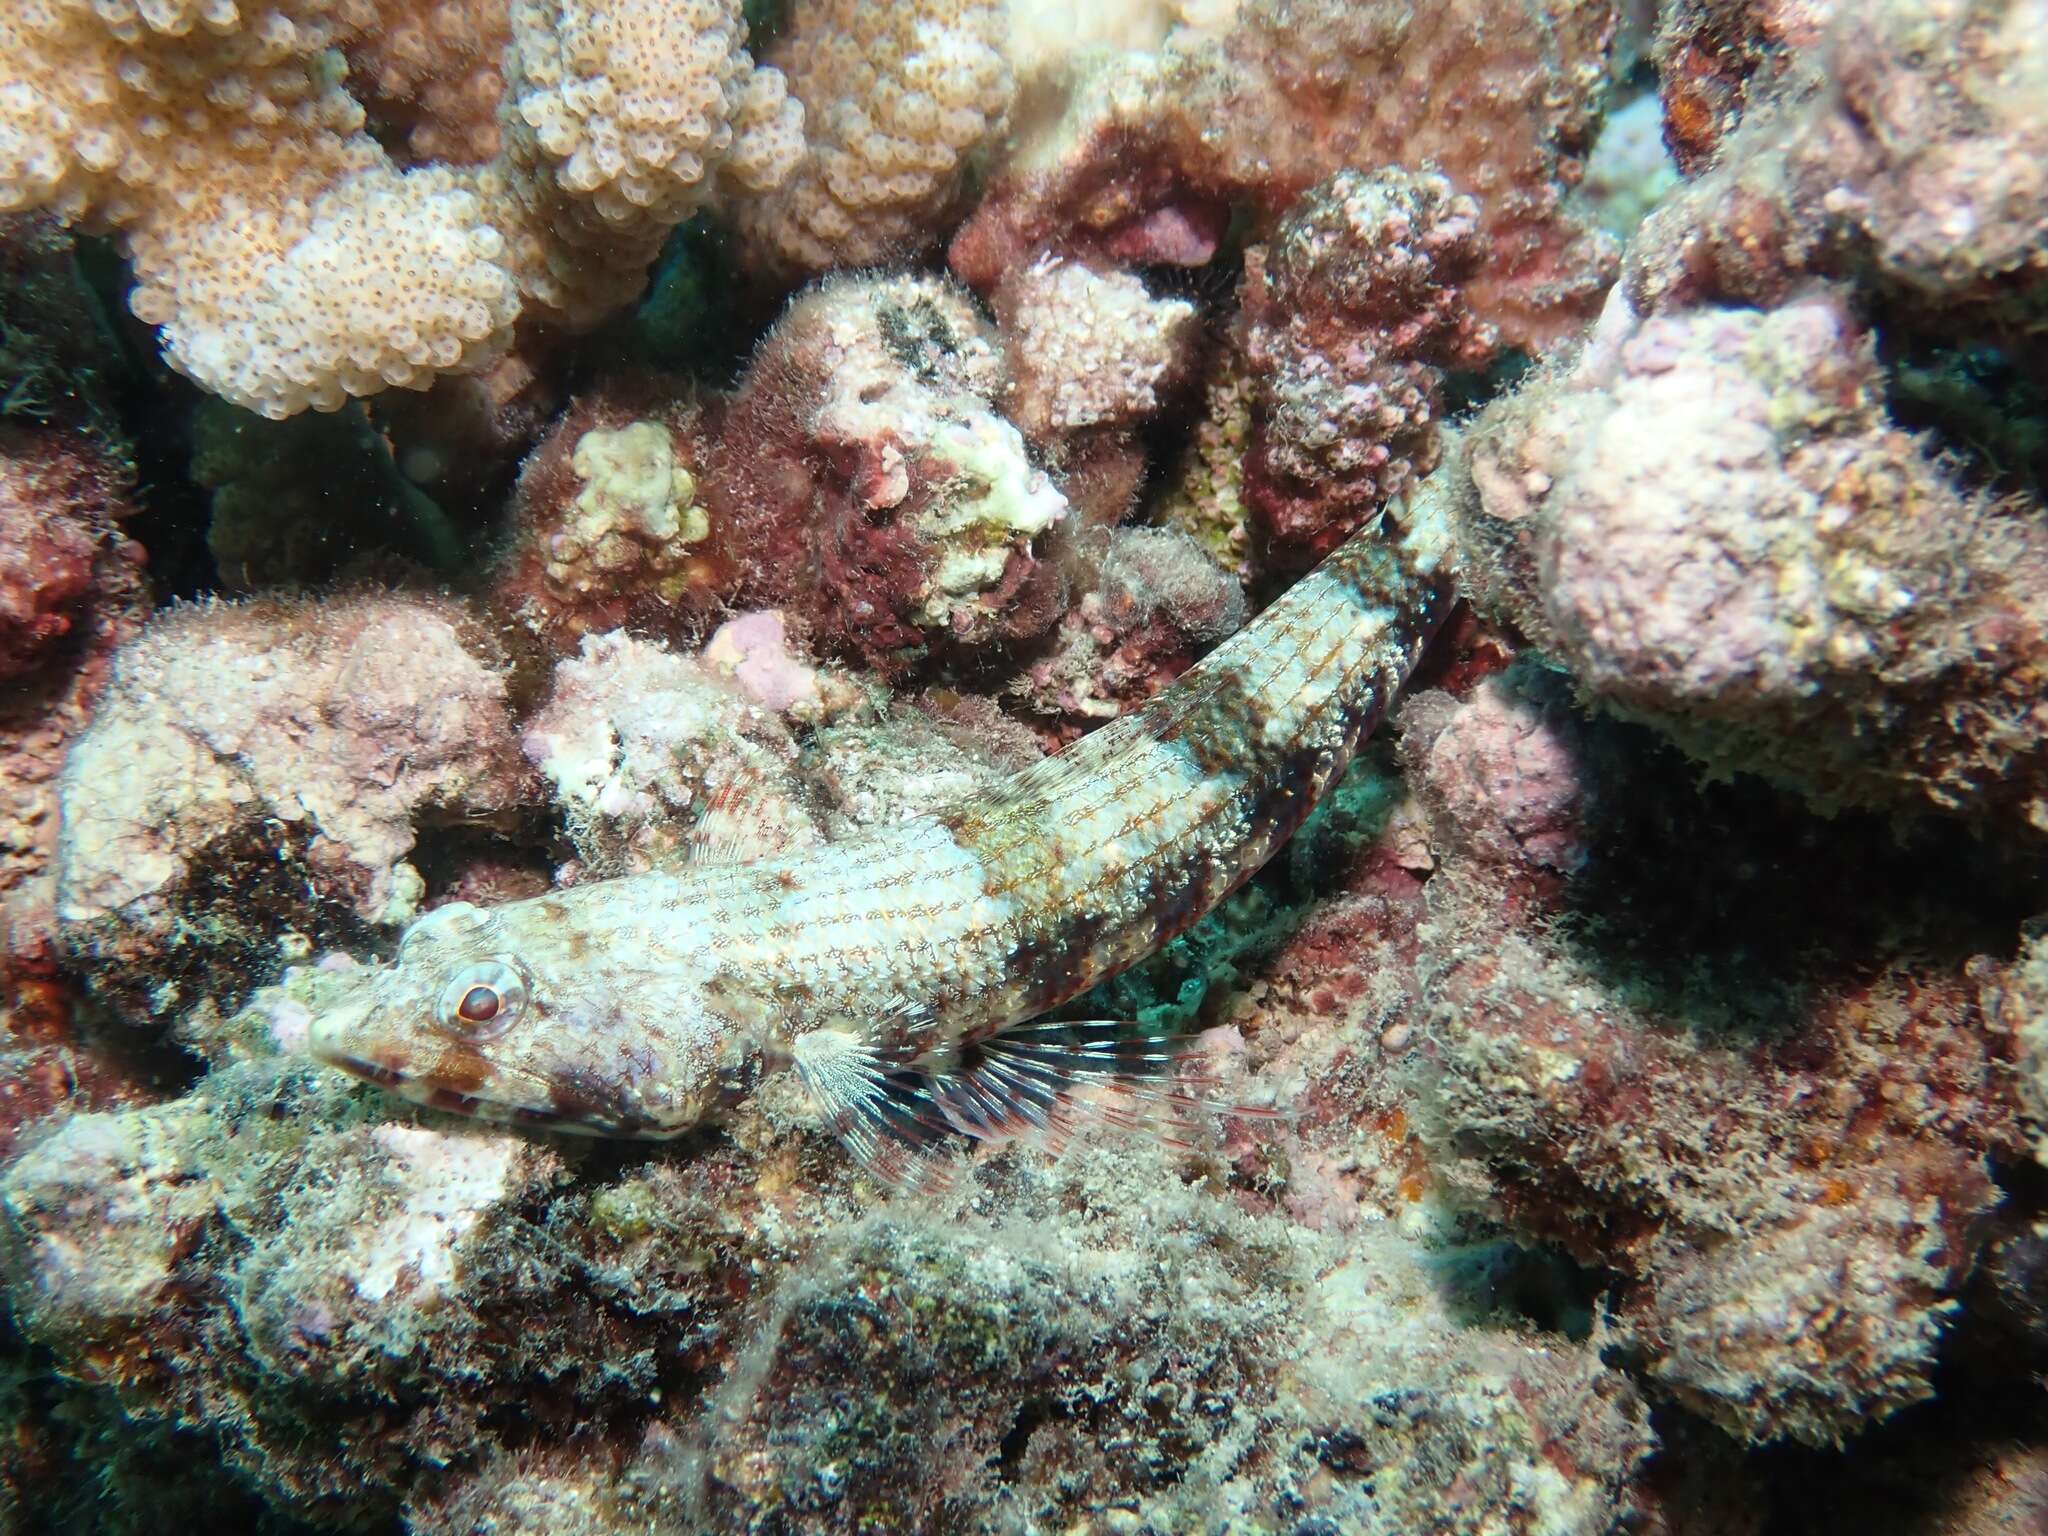 Image of Two-spot lizard fish